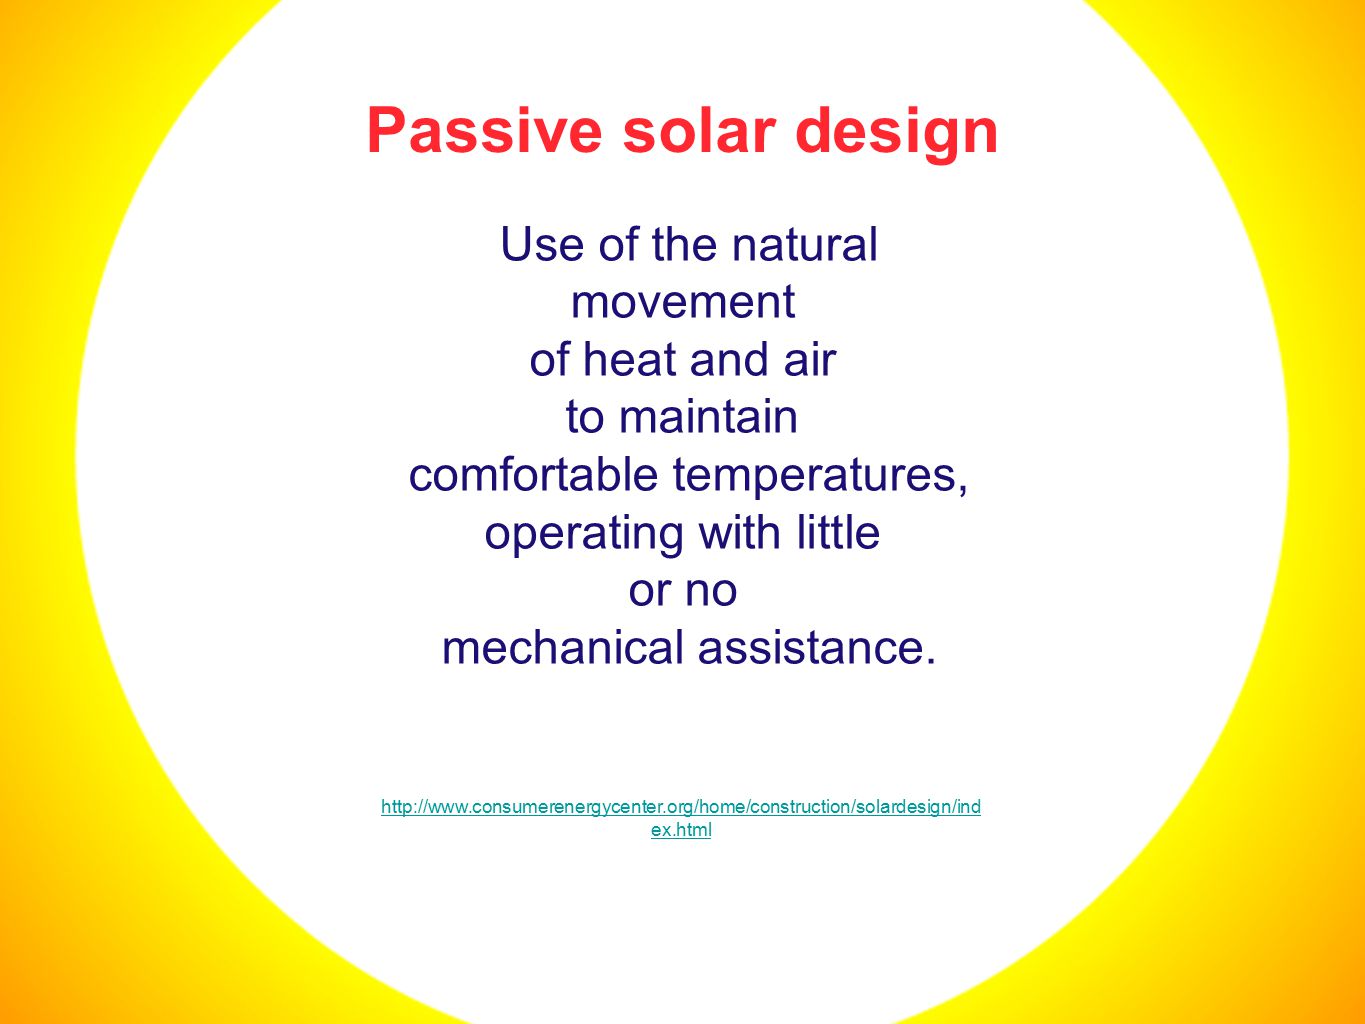 Passive solar design Use of the natural movement of heat and air to maintain comfortable temperatures, operating with little or no mechanical assistance.